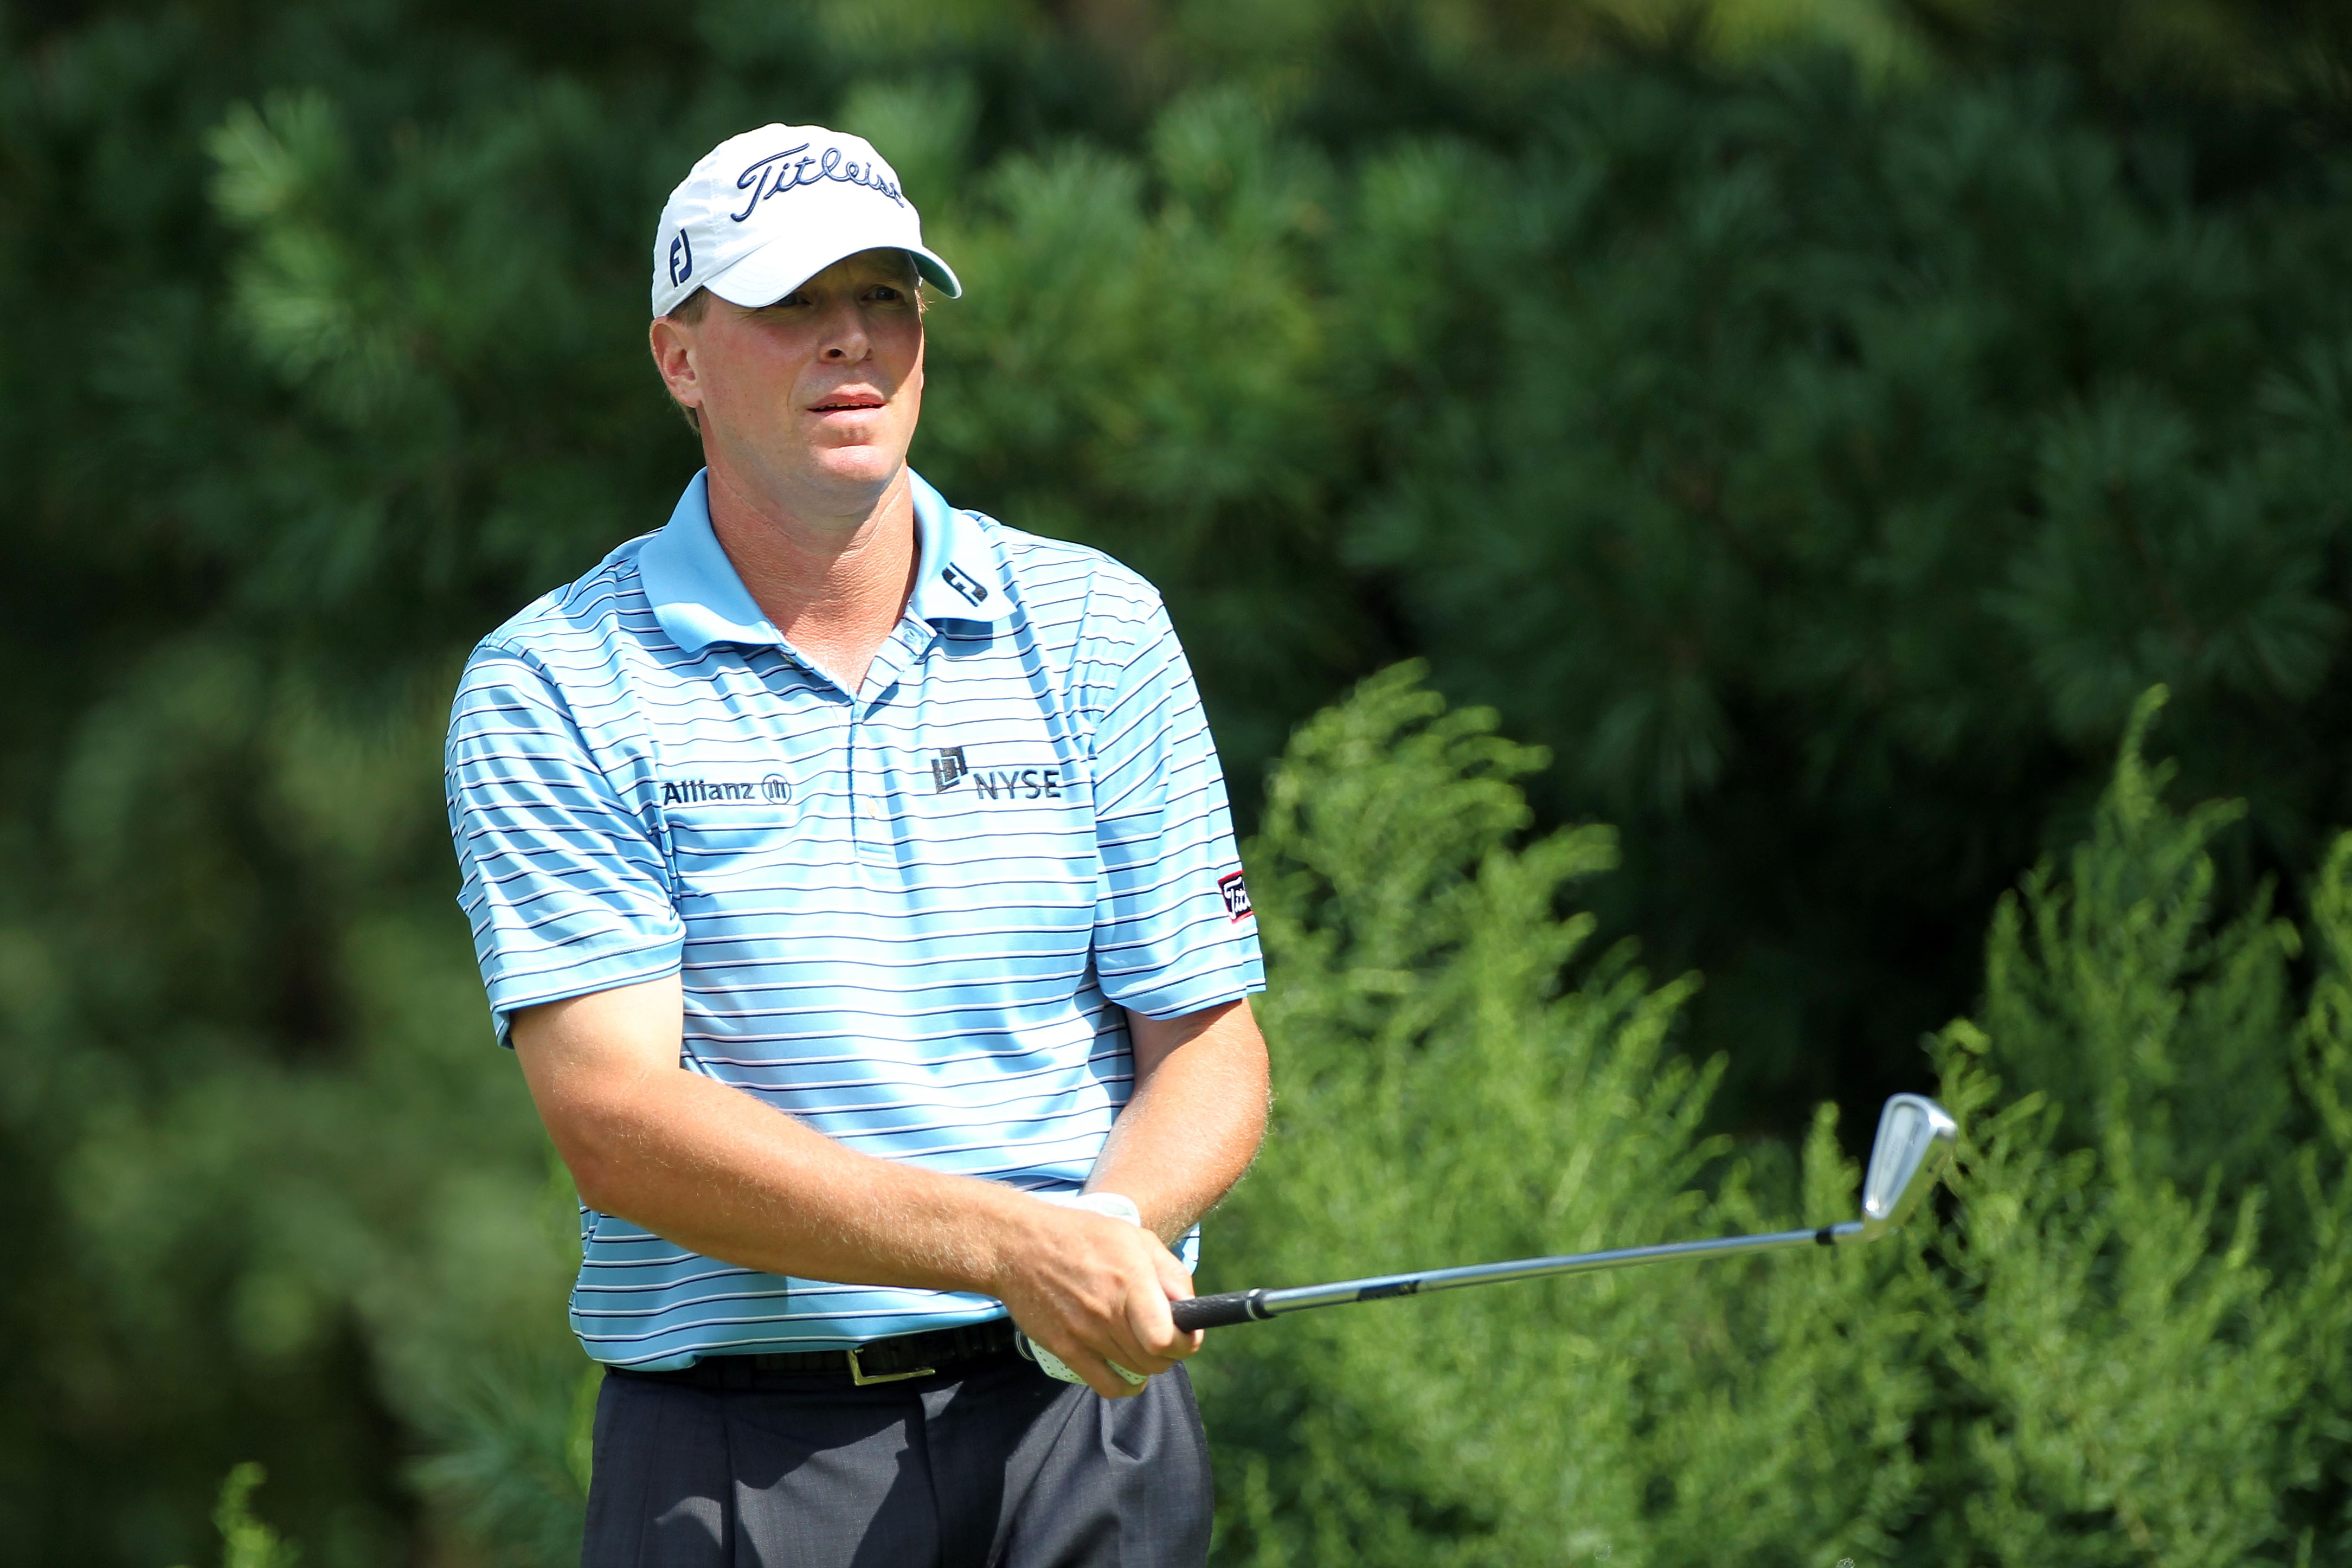 PARAMUS, NJ - AUGUST 26:  Steve Stricker watches his tee shot on the second hole during the first round of The Barclays at the Ridgewood Country Club on August 26, 2010 in Paramus, New Jersey.  (Photo by Hunter Martin/Getty Images)